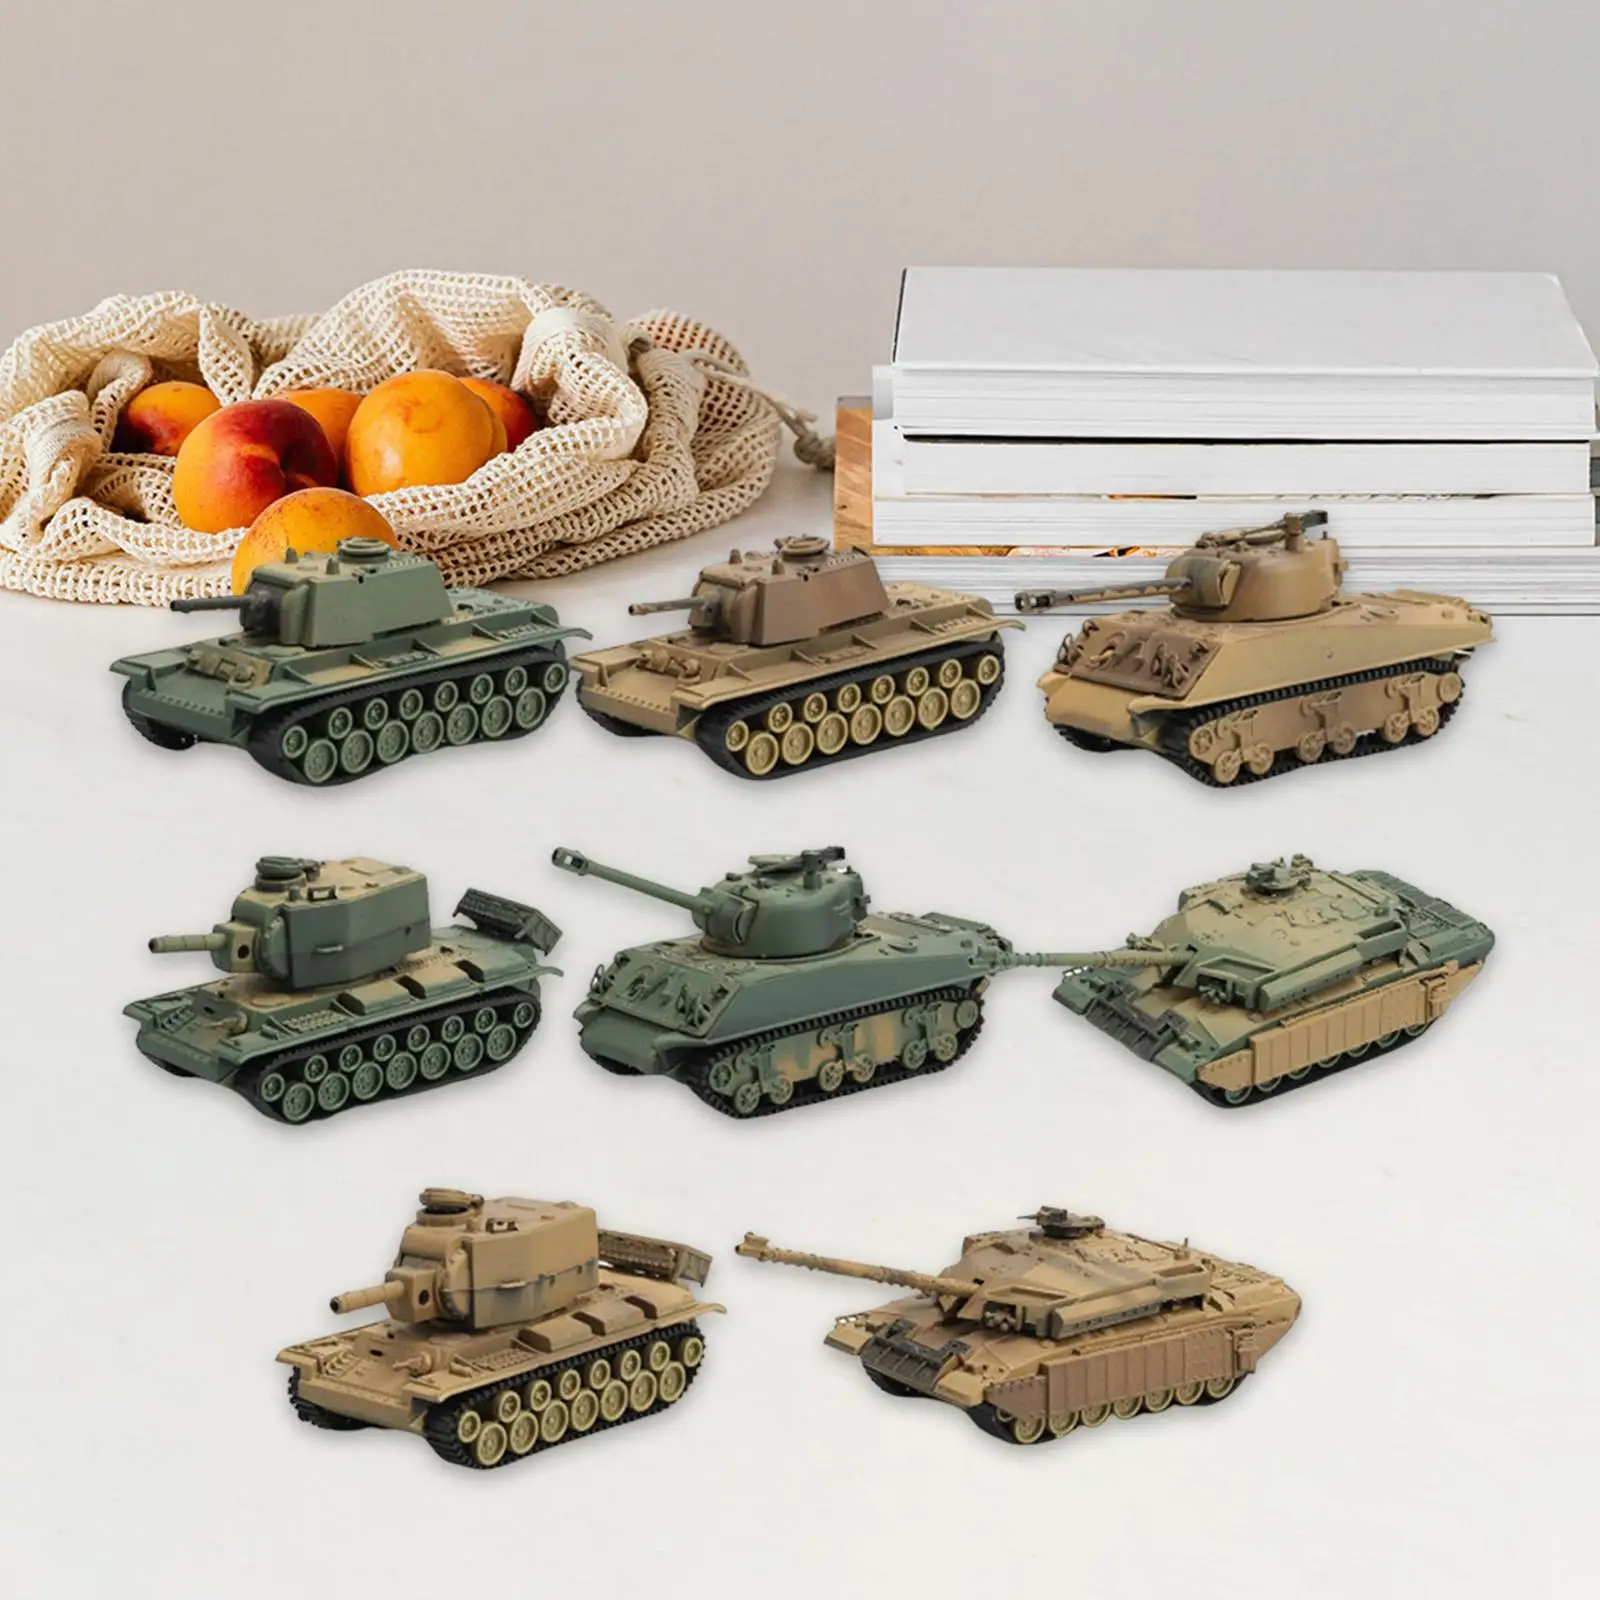 8 Pieces 1:72 Scale Static Tanks Collectibles Toys for Beginners